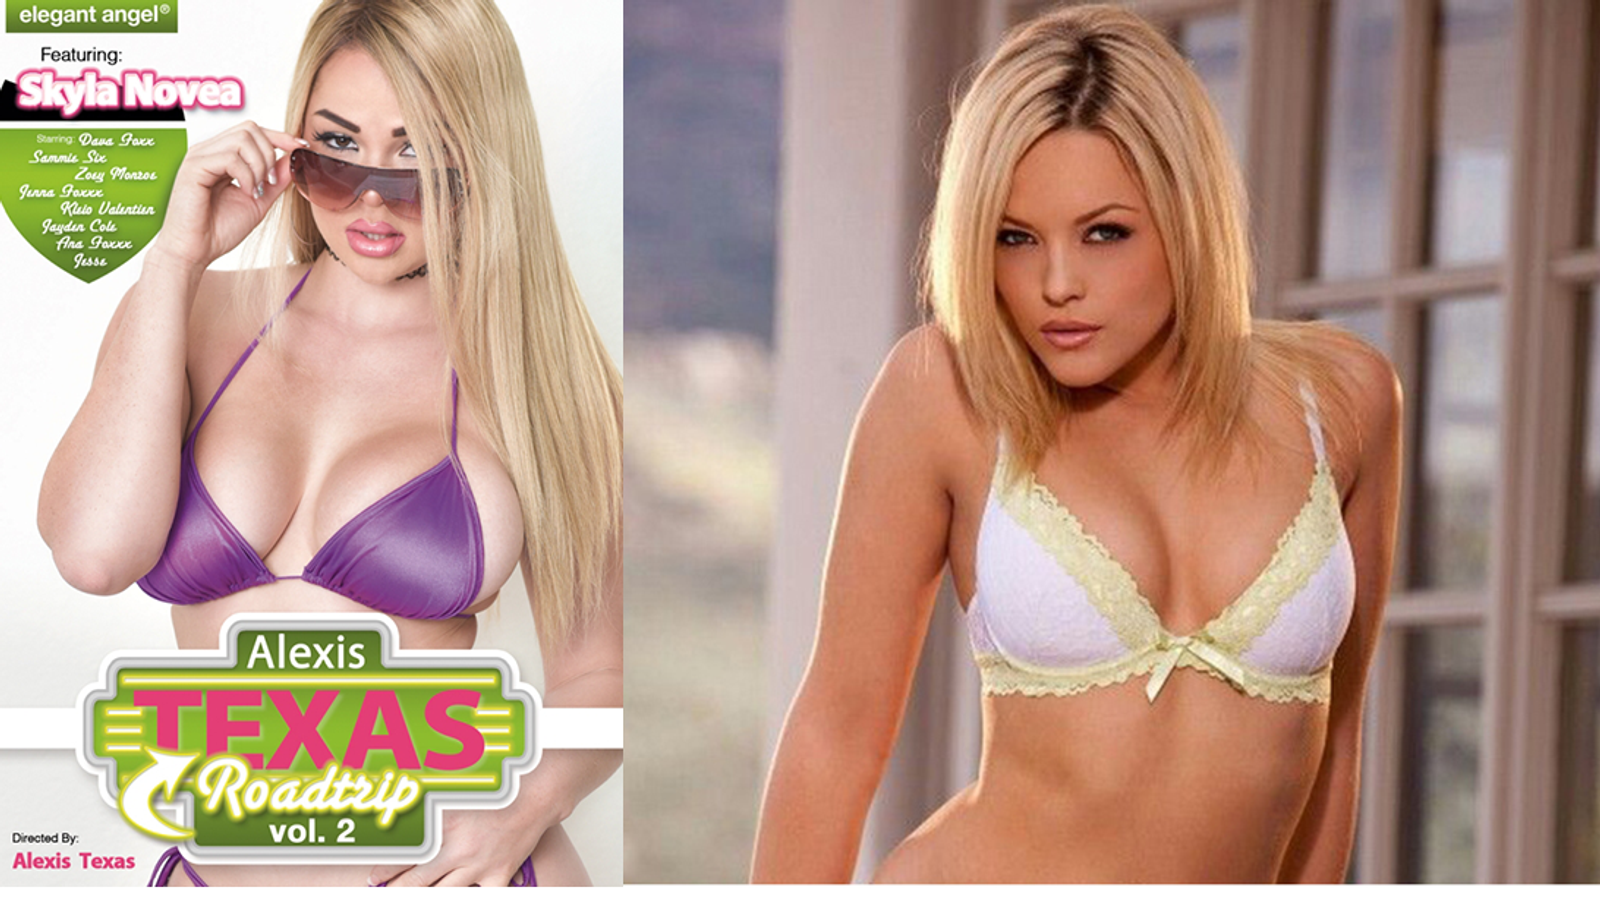 That Famous Texan Is At It Again In 'Alexis Texas Roadtrip 2'